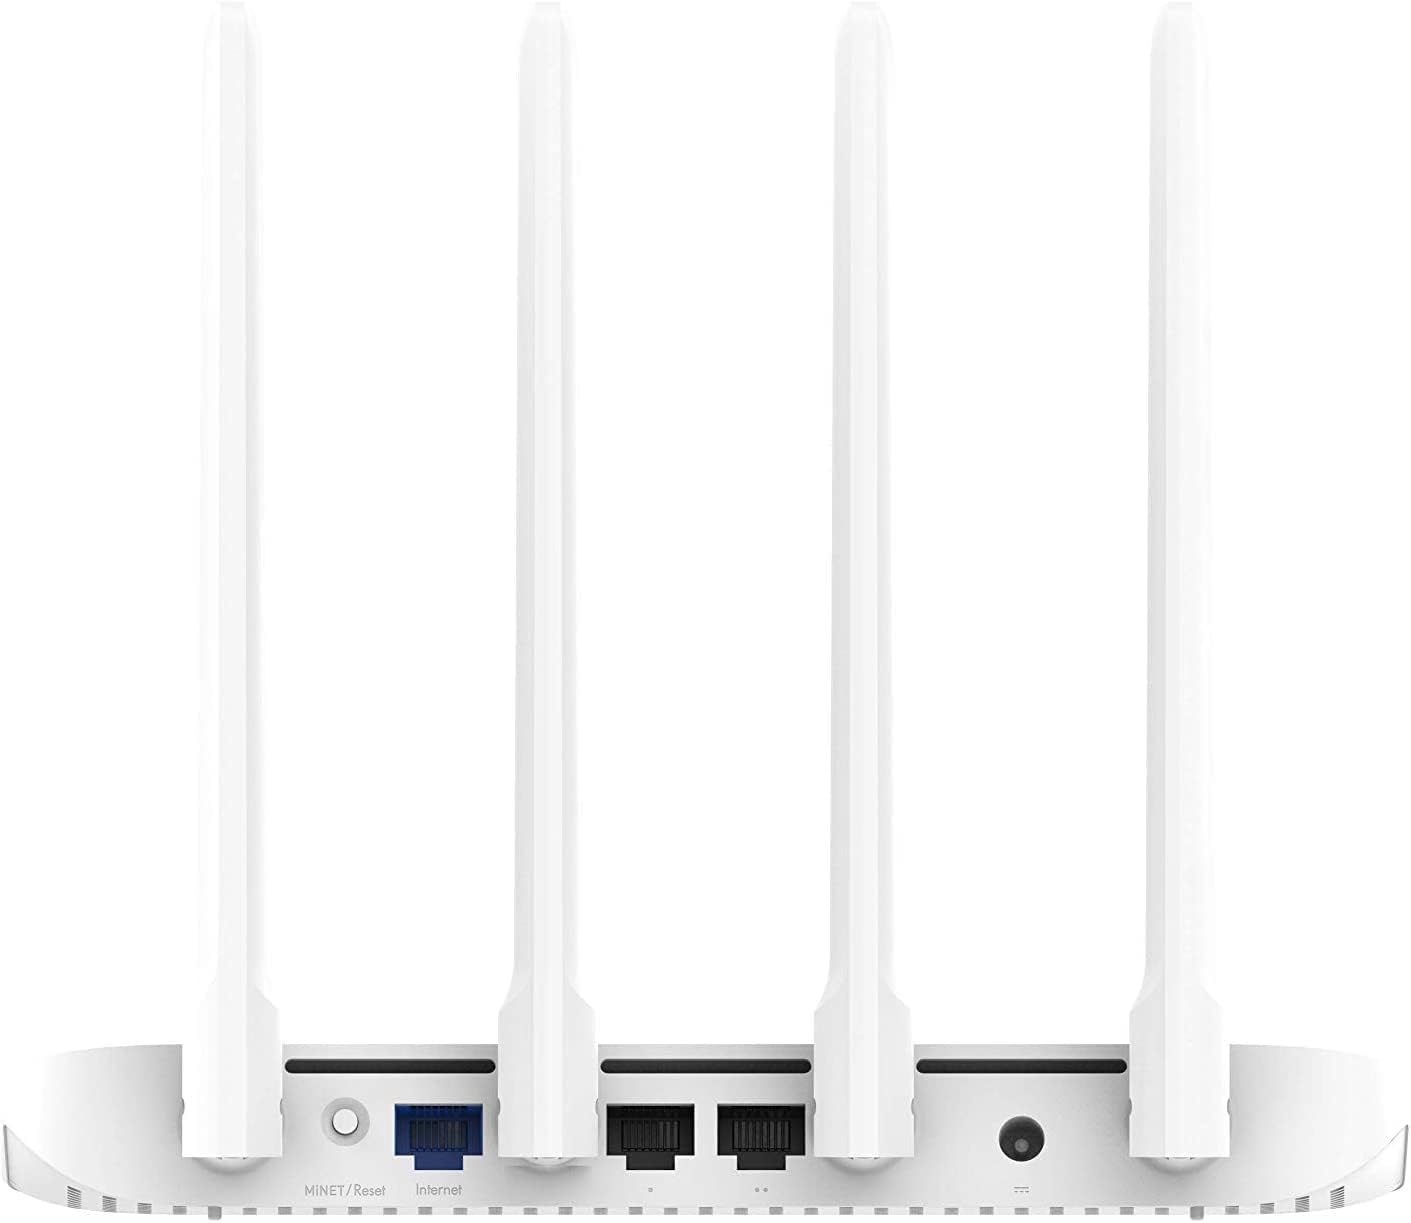 Xiaomi 4C 300 Mbps High Speed Wi-Fi Router